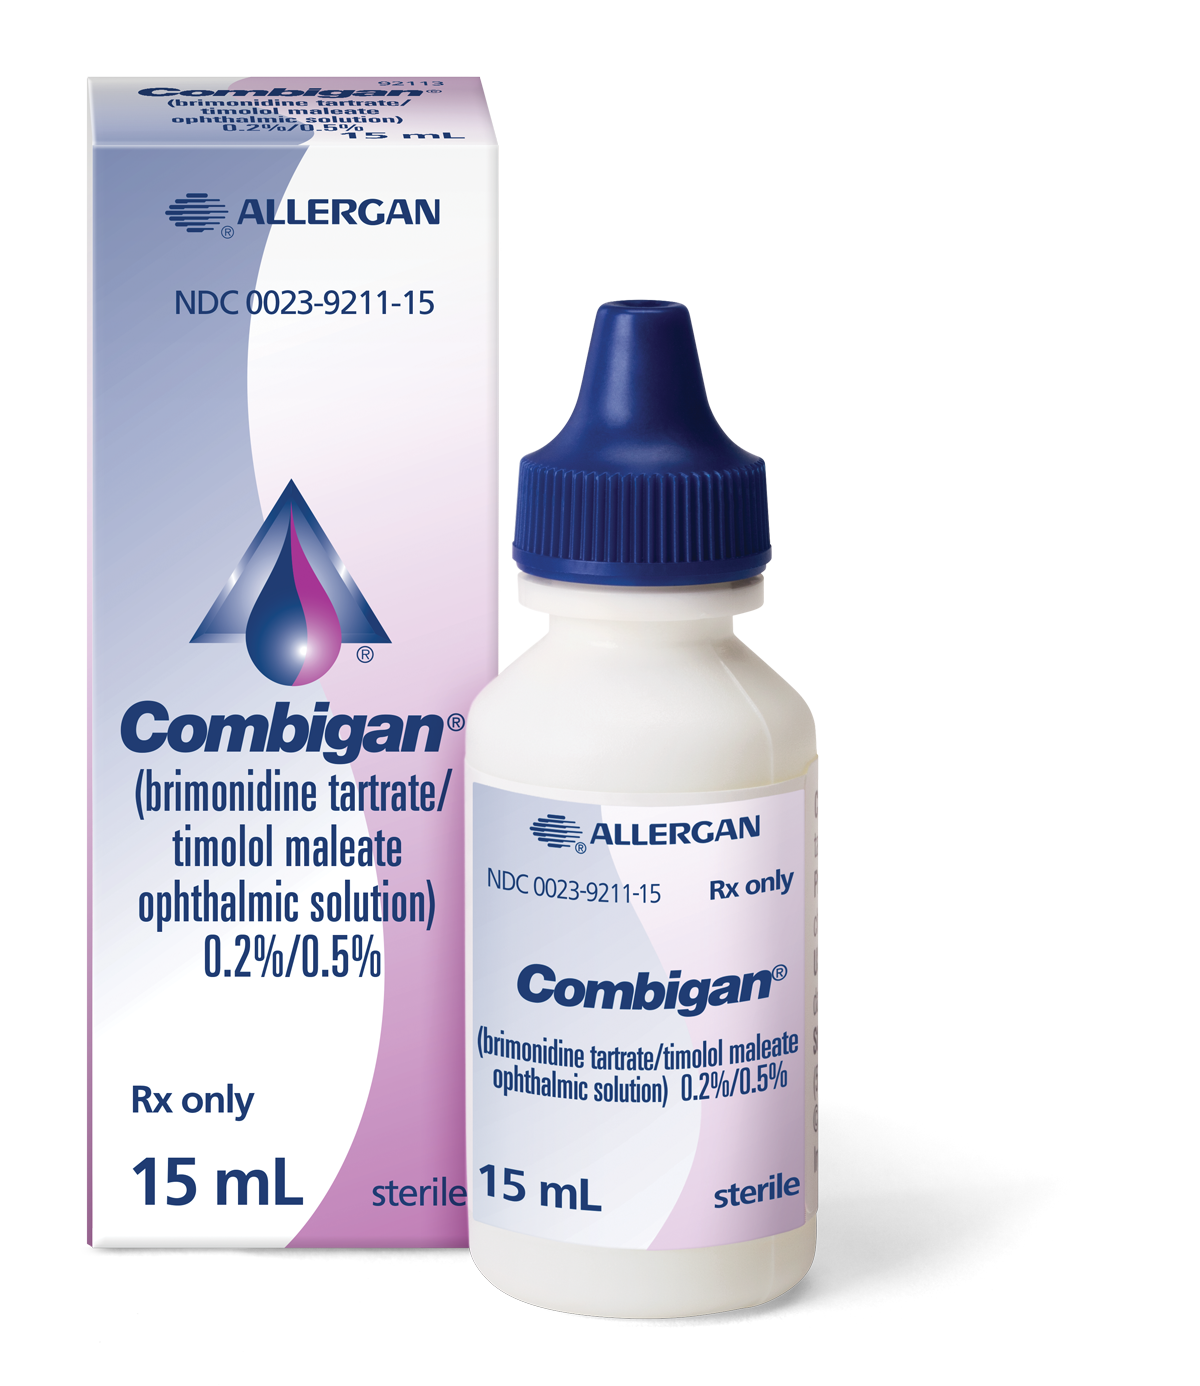 COMBIGAN 15 ML Box and Bottle